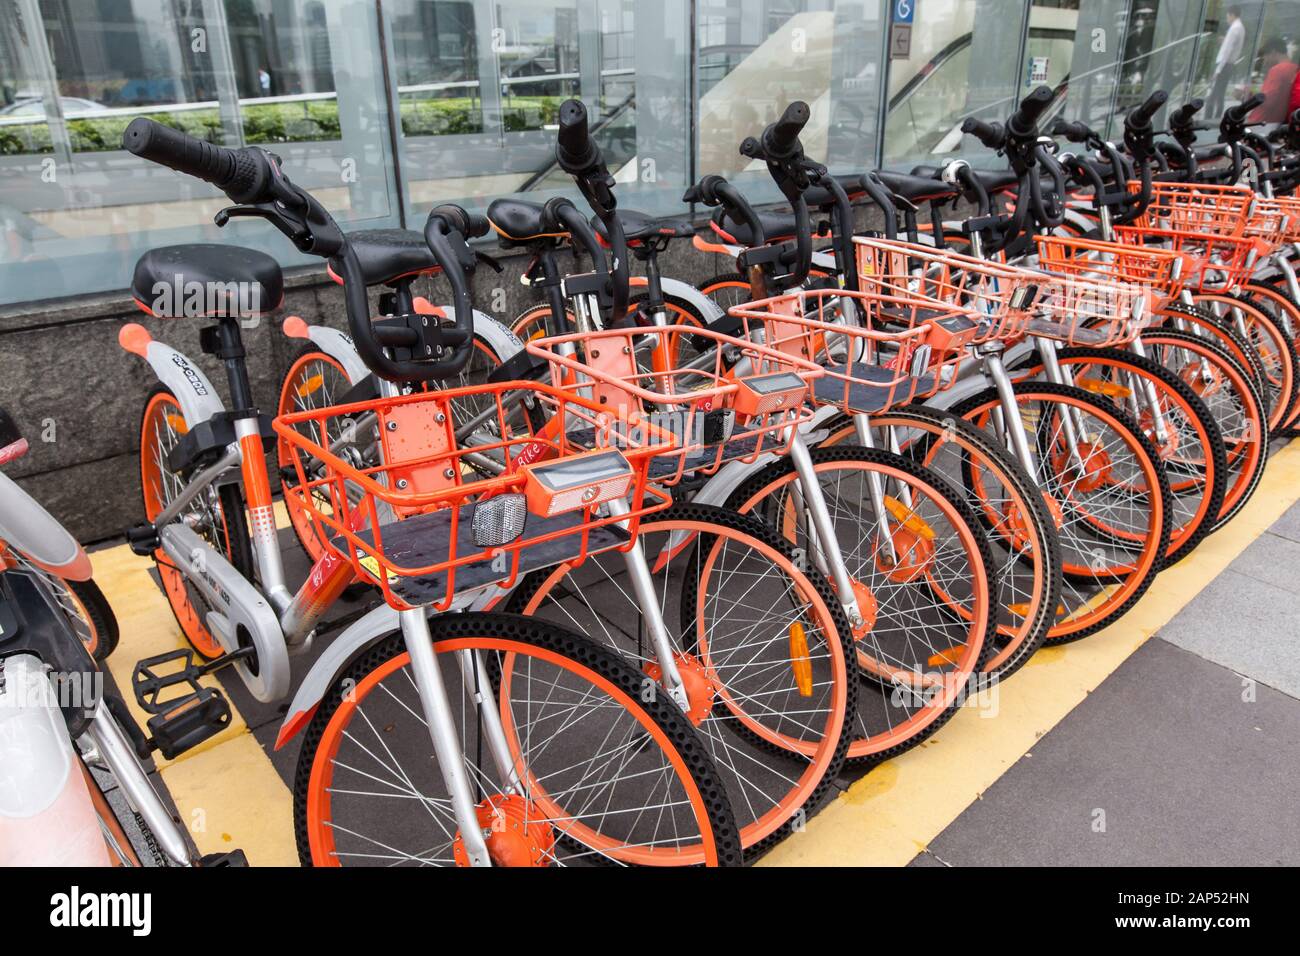 Mobike brand is a bicycle sharing program in Singapore. Tourists can use the bicycle service to tour around the city with a relax pace. Stock Photo